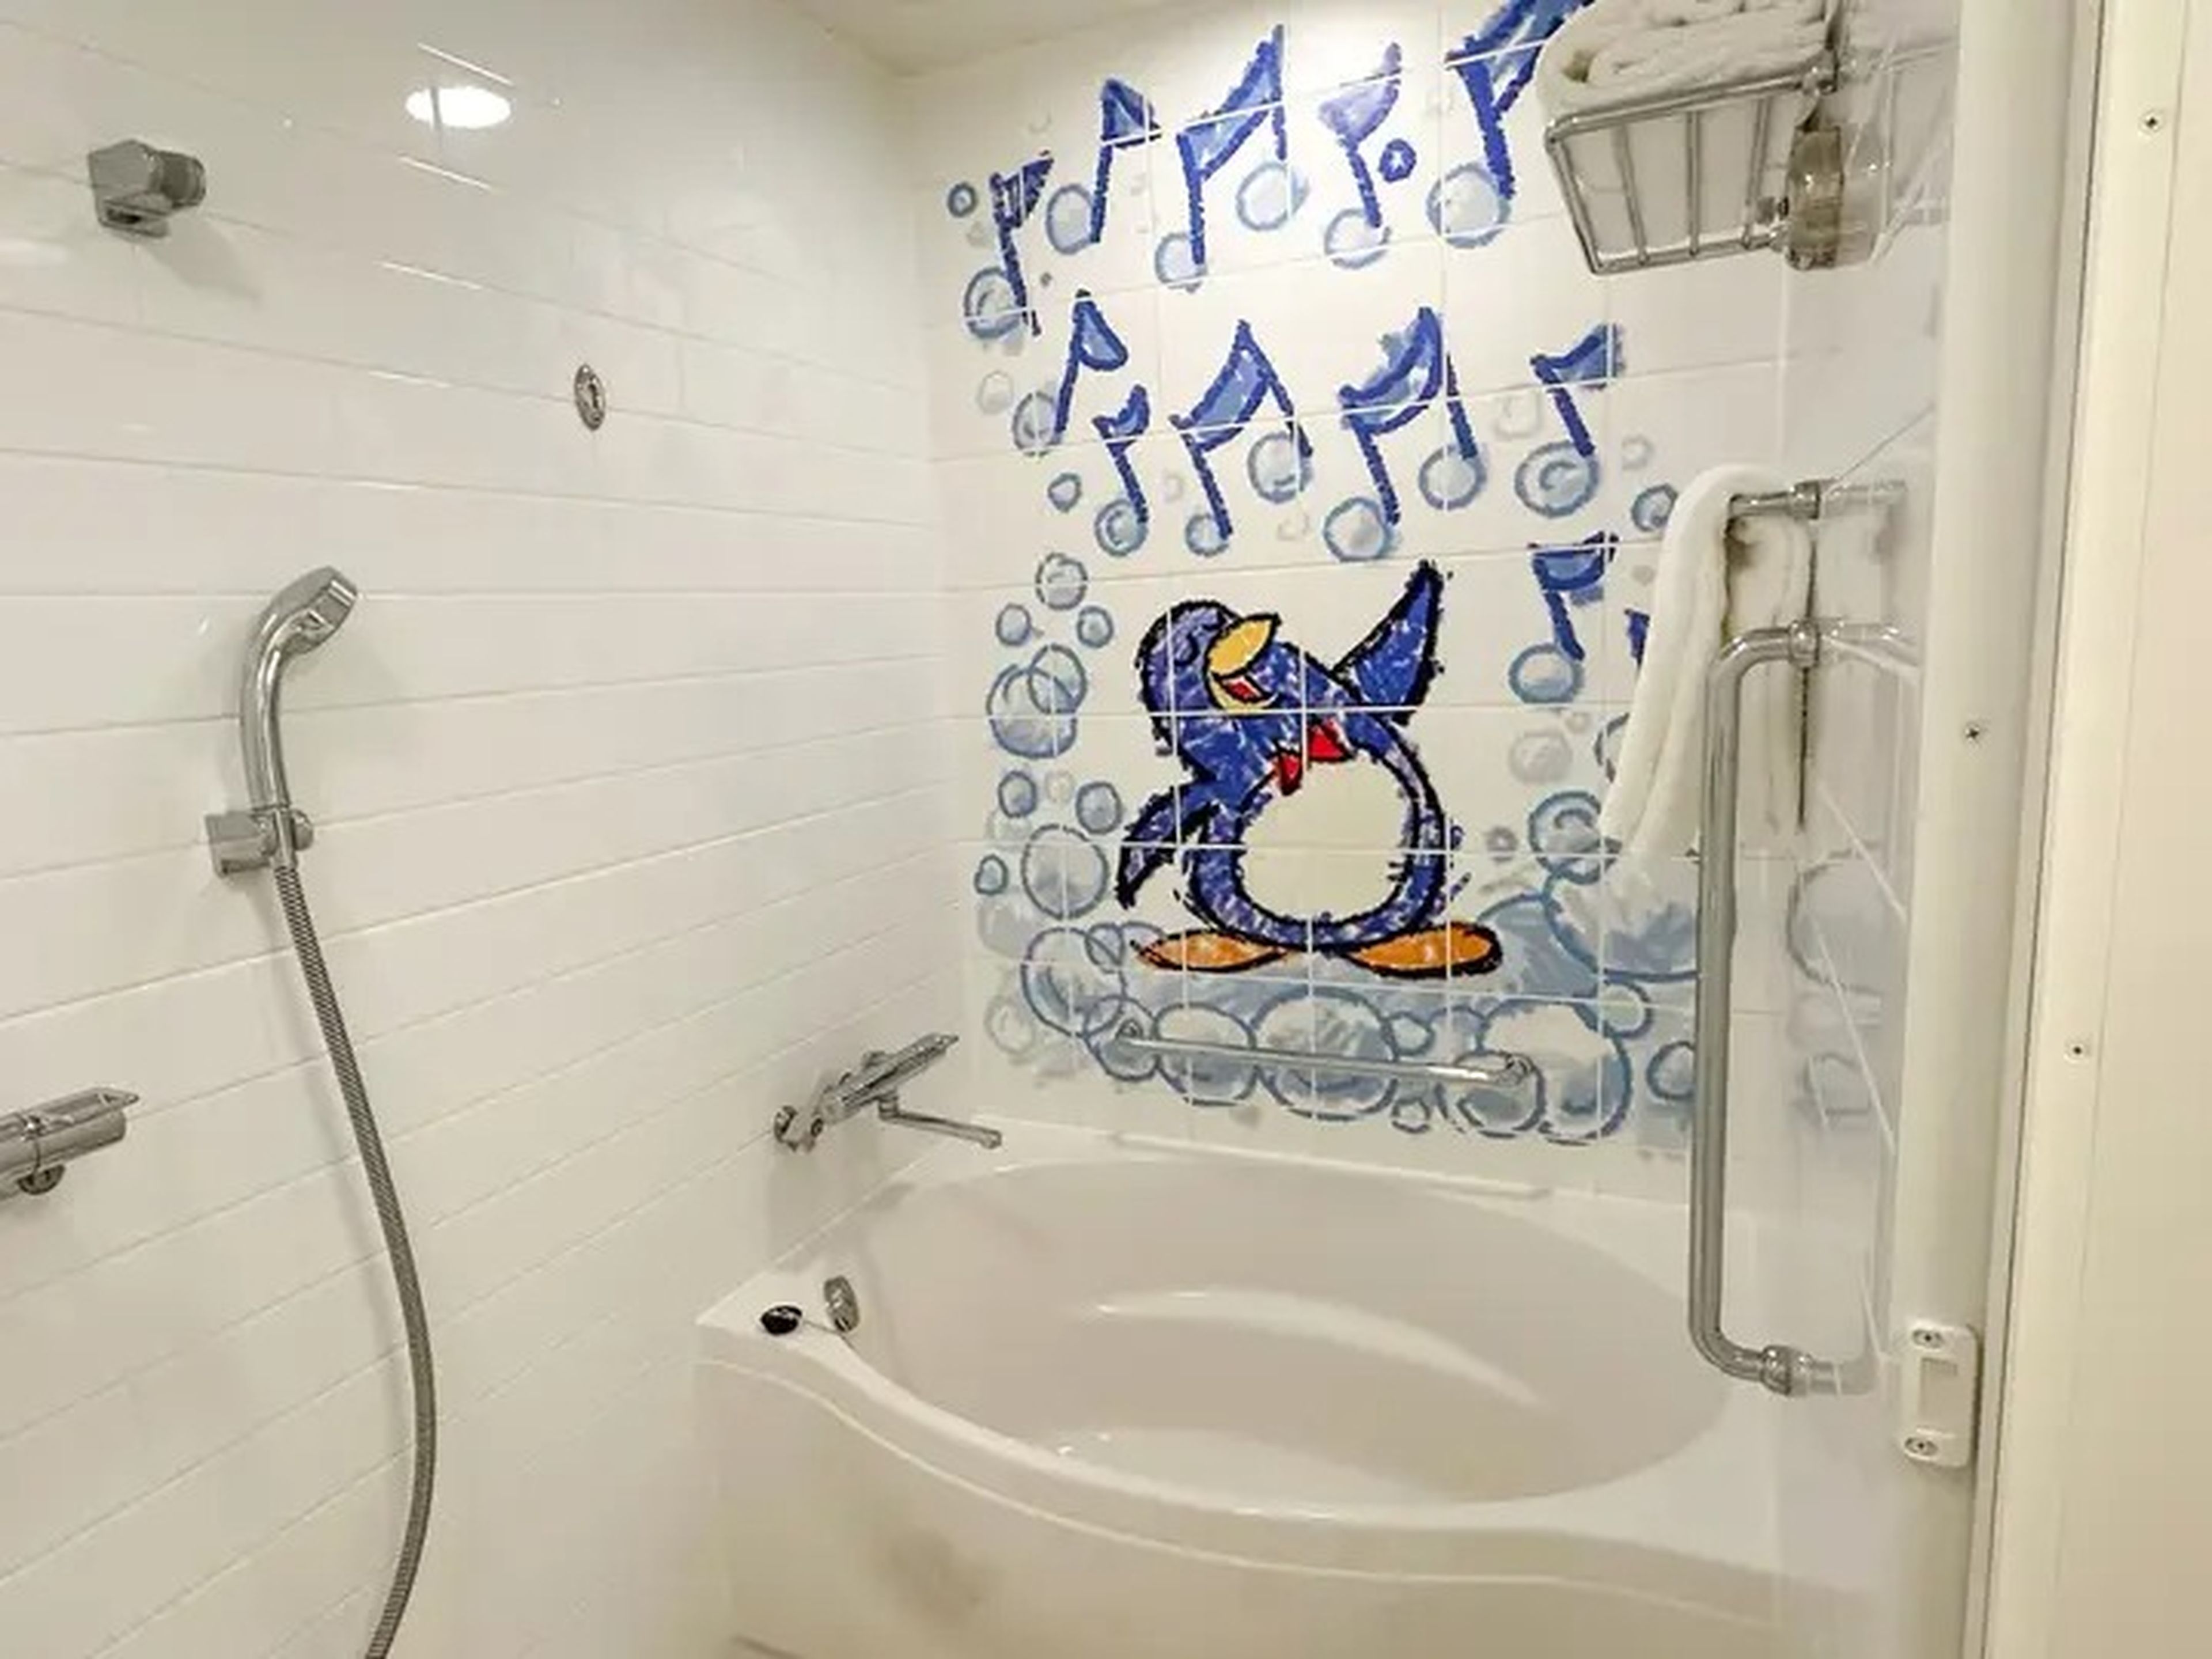 A guest bathroom at Tokyo's Toy Story Hotel features file with a Wheezy character singing in the tub with blue bubbles and music notes surrounding him.